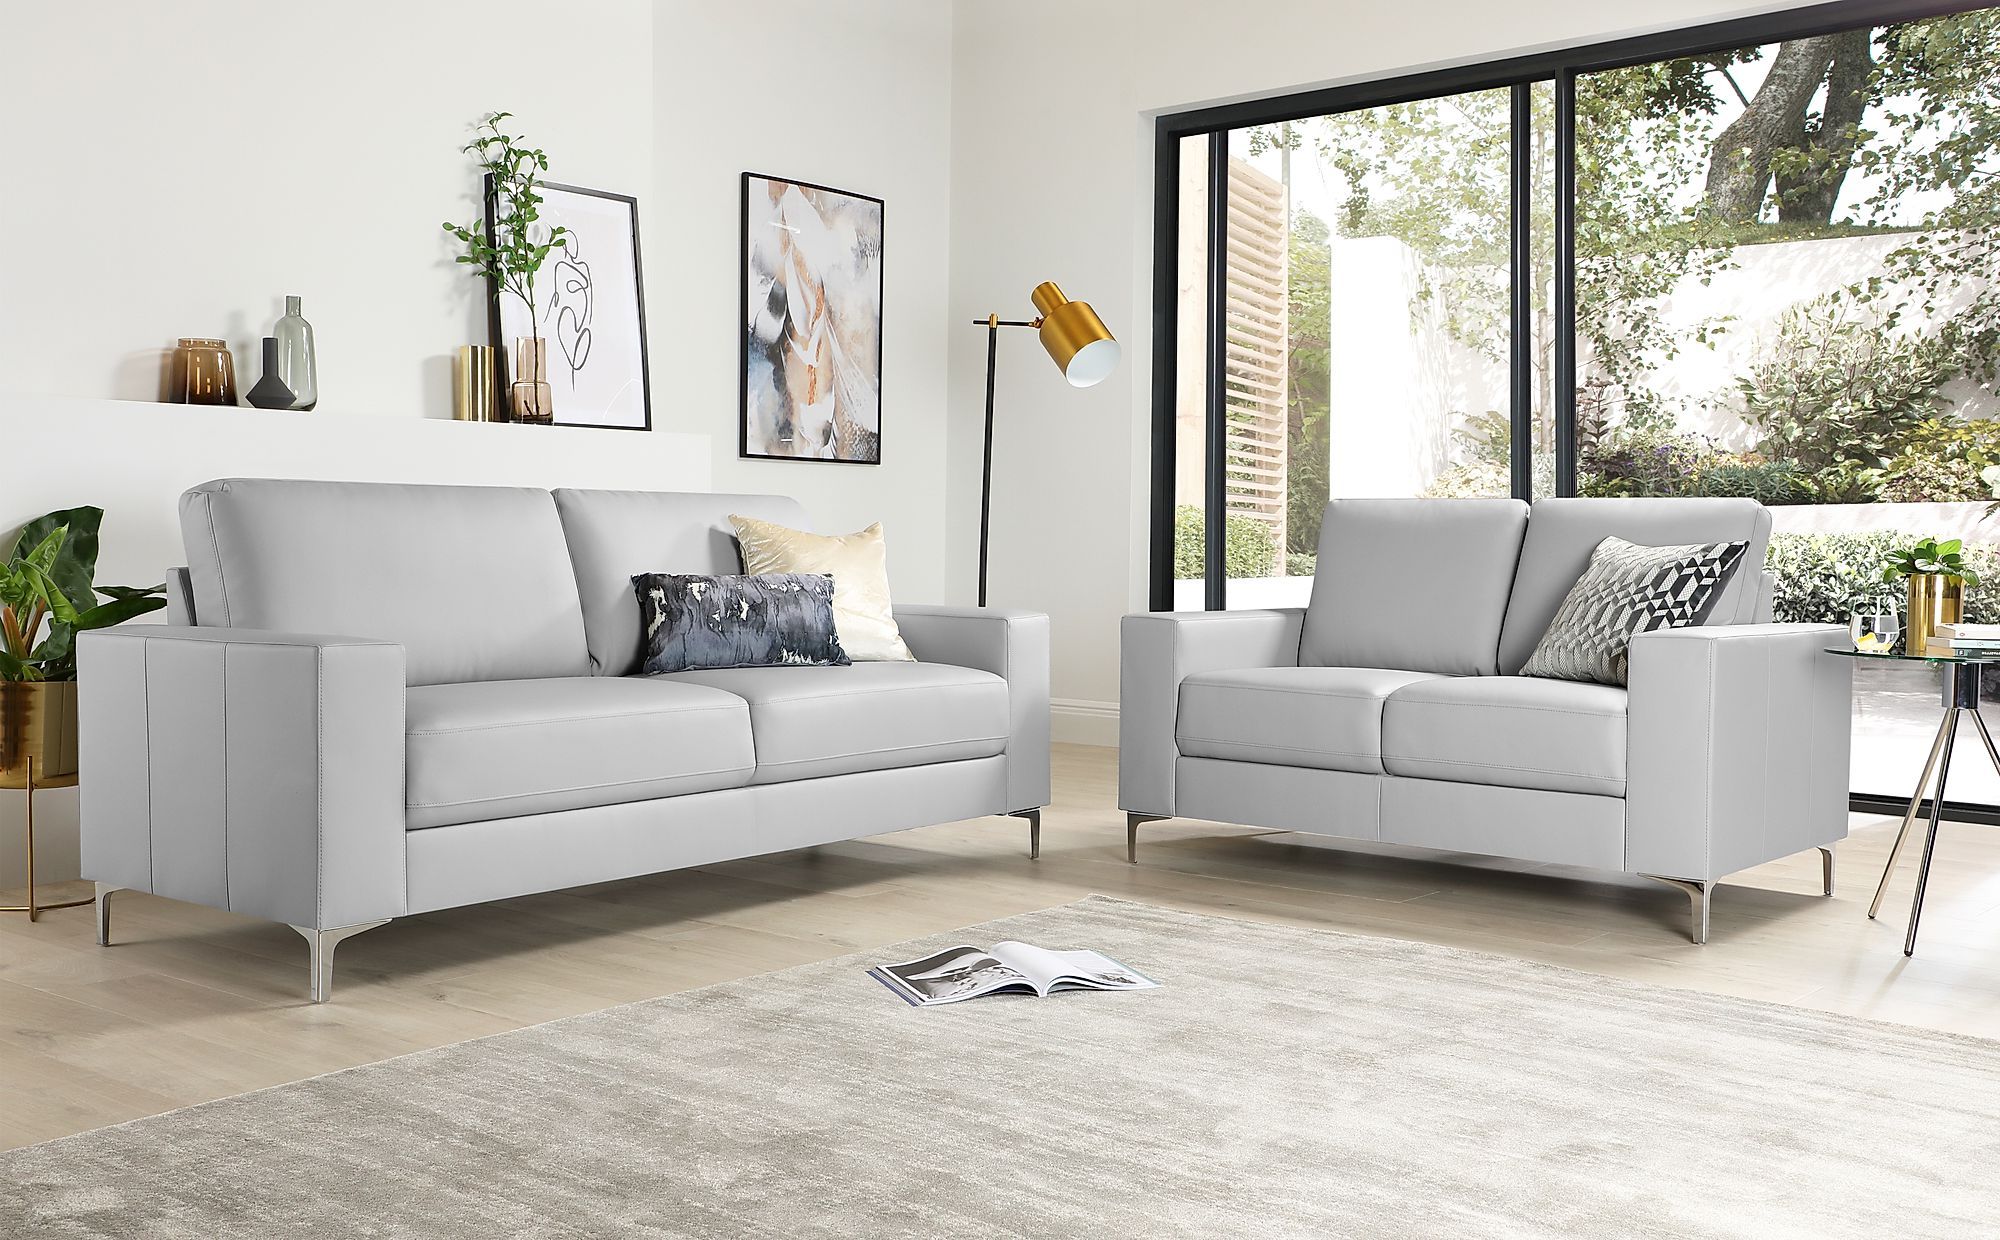 Baltimore Light Grey Leather 3+2 Seater Sofa Set | Furniture Choice With Regard To Sofas In Light Gray (View 8 of 20)